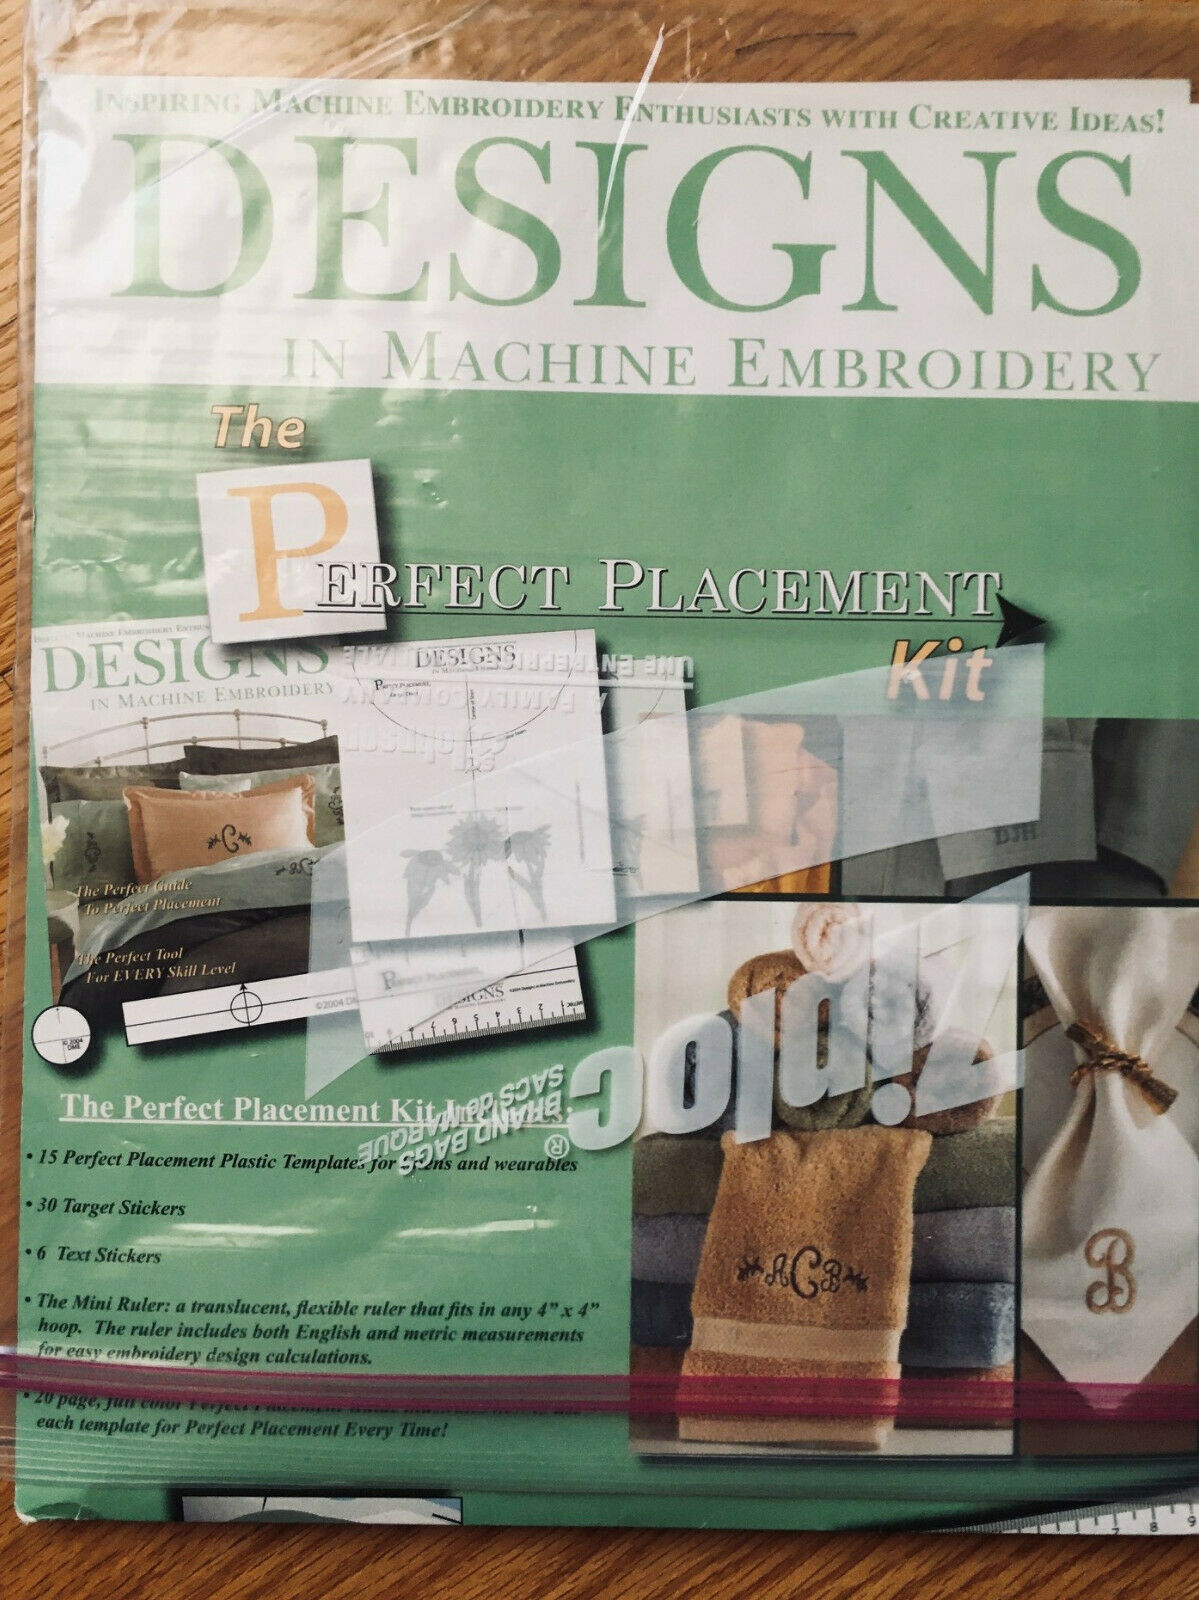 Perfect Placement Kit - Designs In Machine Embroidery, New, Opened Package